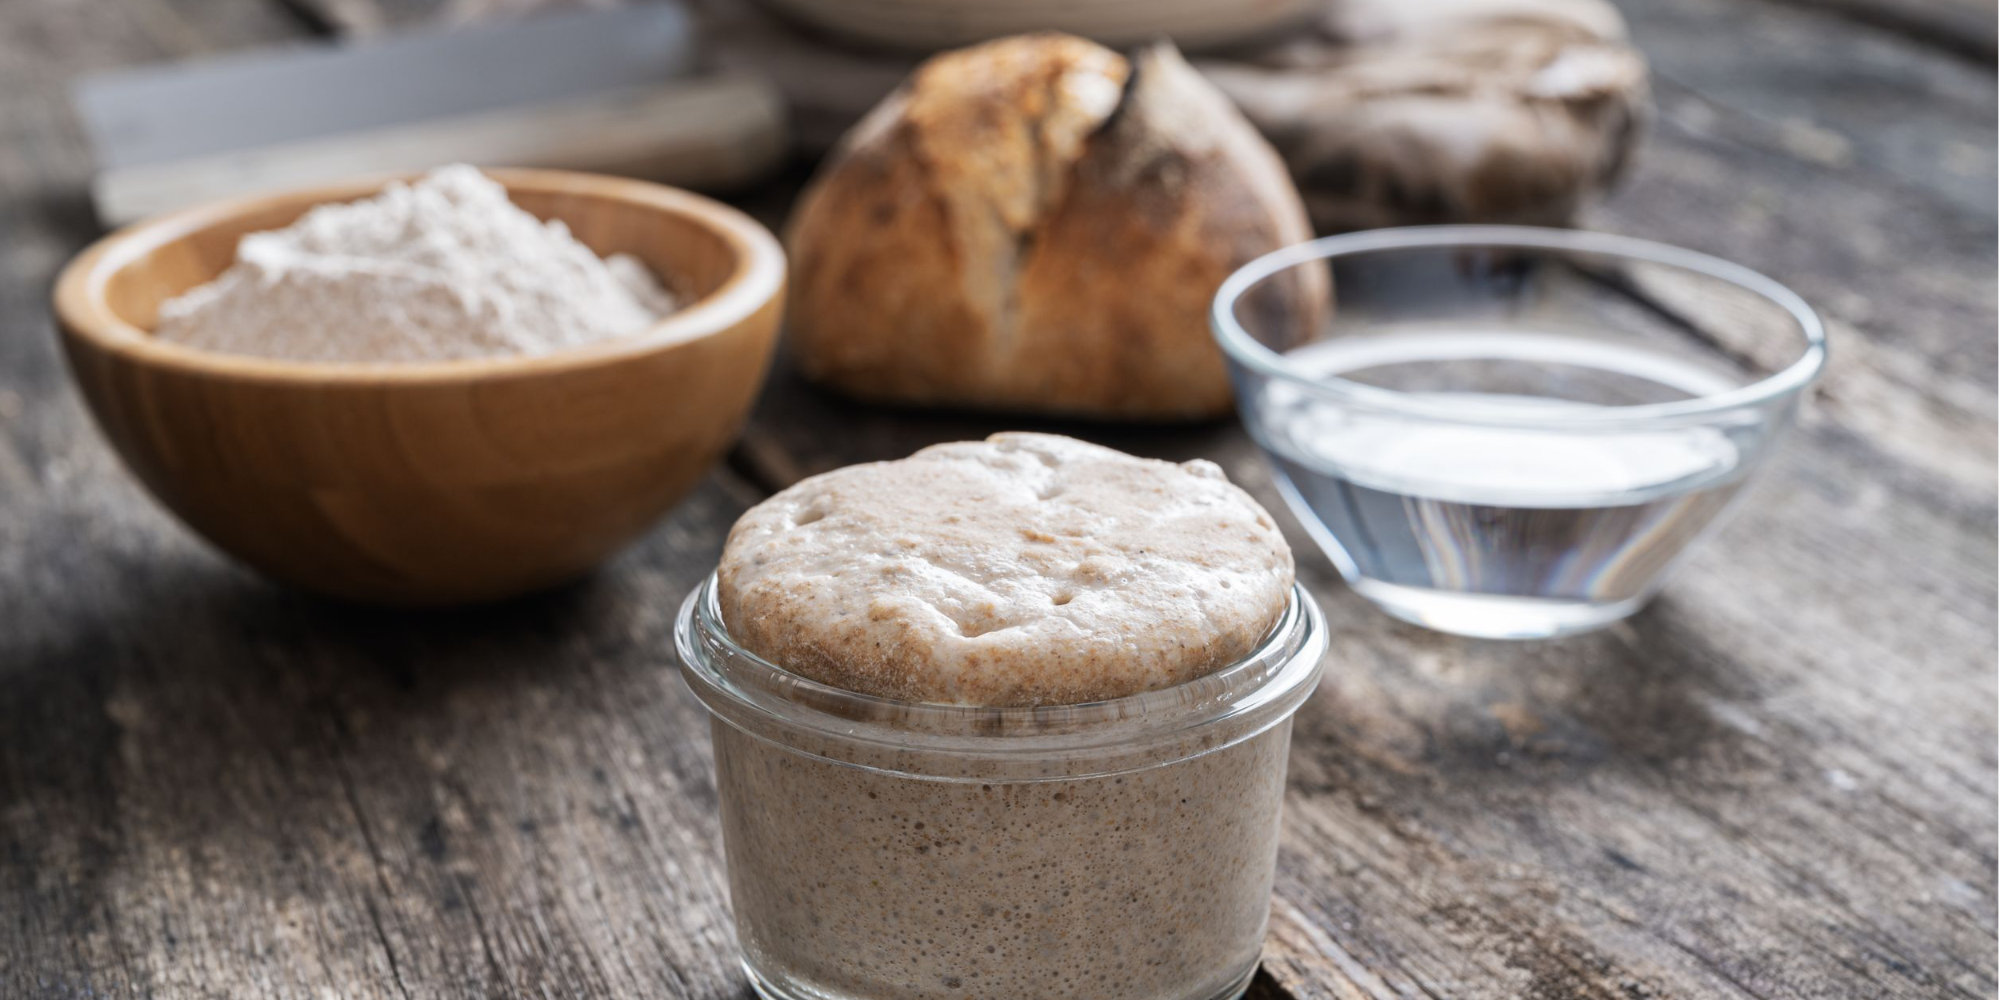 Sourdough culture as a metaphor to needing to look after your culture